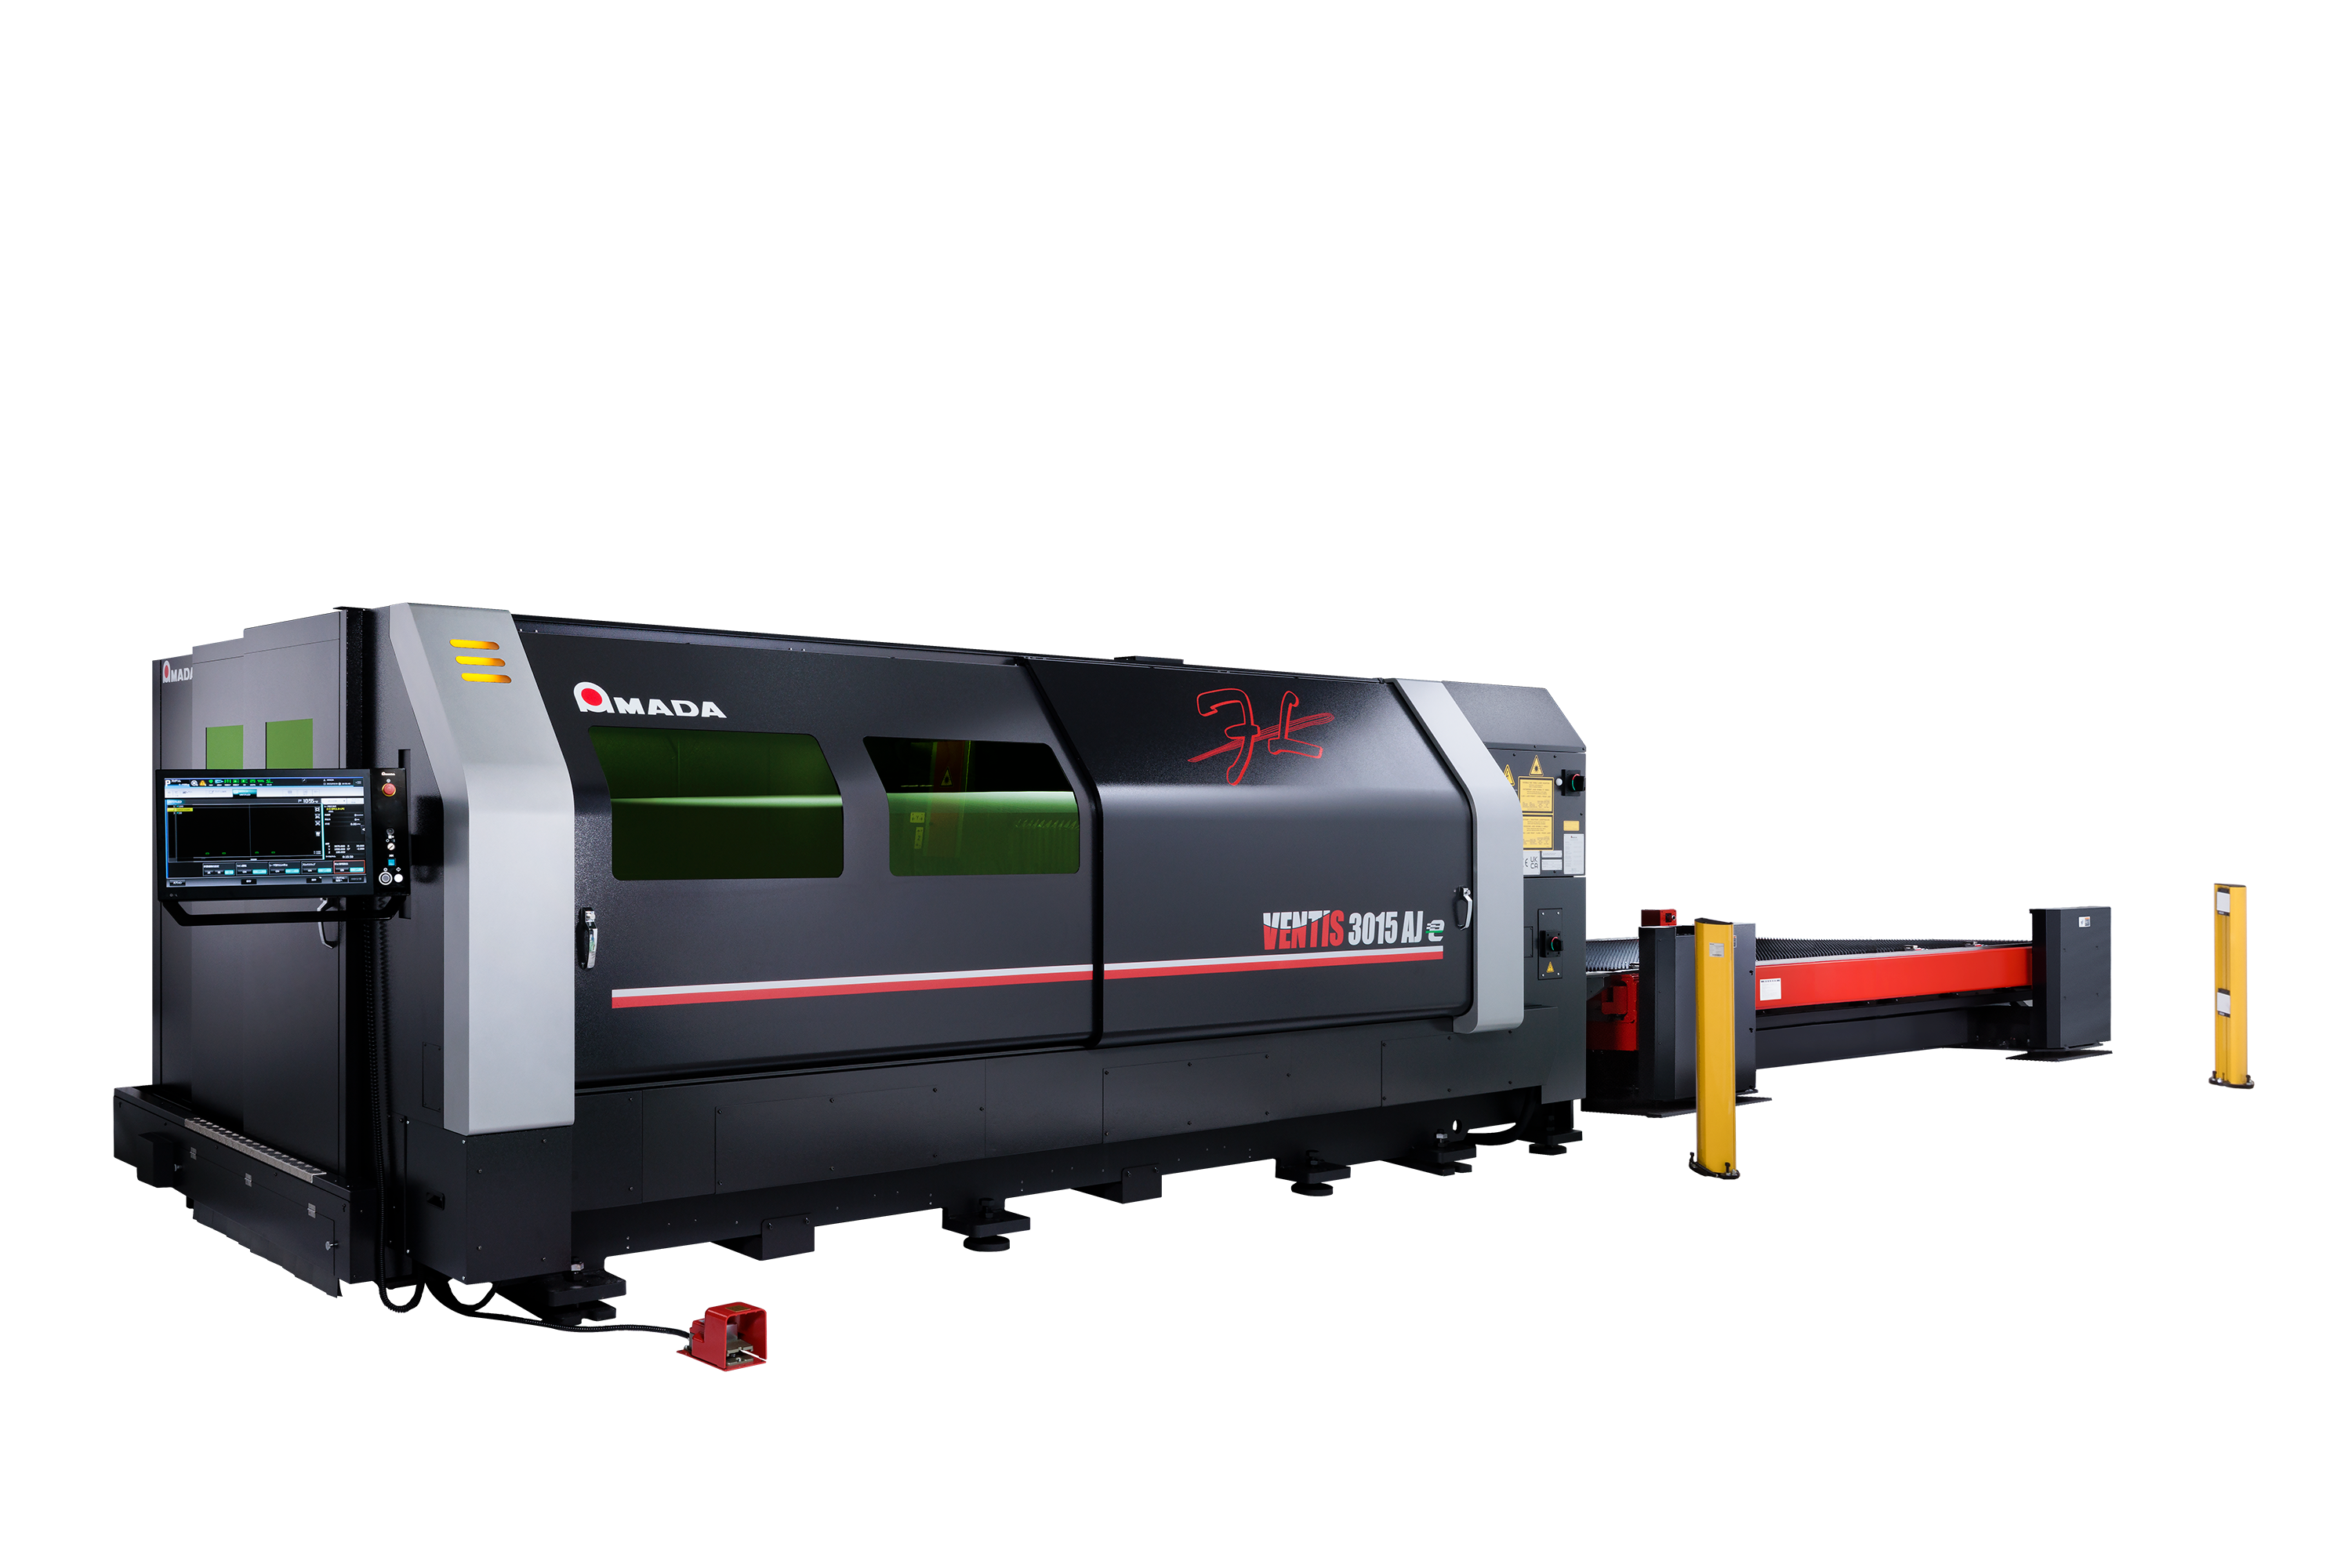 The featured image from AMADA Canada to Display Fibre Laser Cutting Machine, Press Brake with Automatic Tool Change at FABTECH Canada